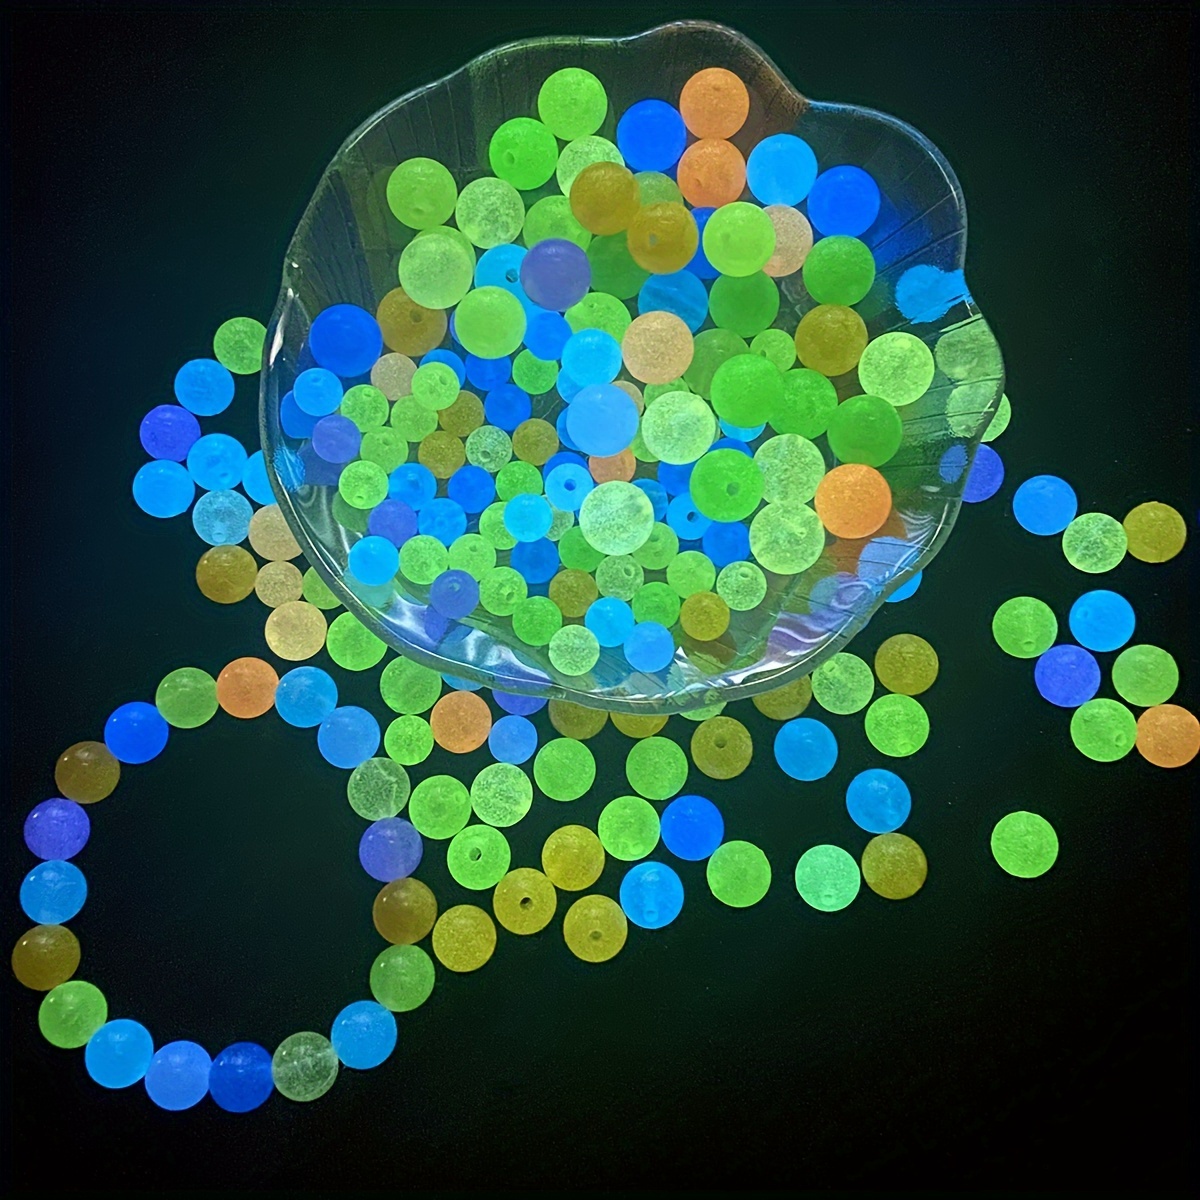 

800pcs Colorful Luminous Beads Acrylic Round Bead Glow-in-the-dark Bracelet Necklace Jewelry Diy Accessories Fluorescent Loose Beads